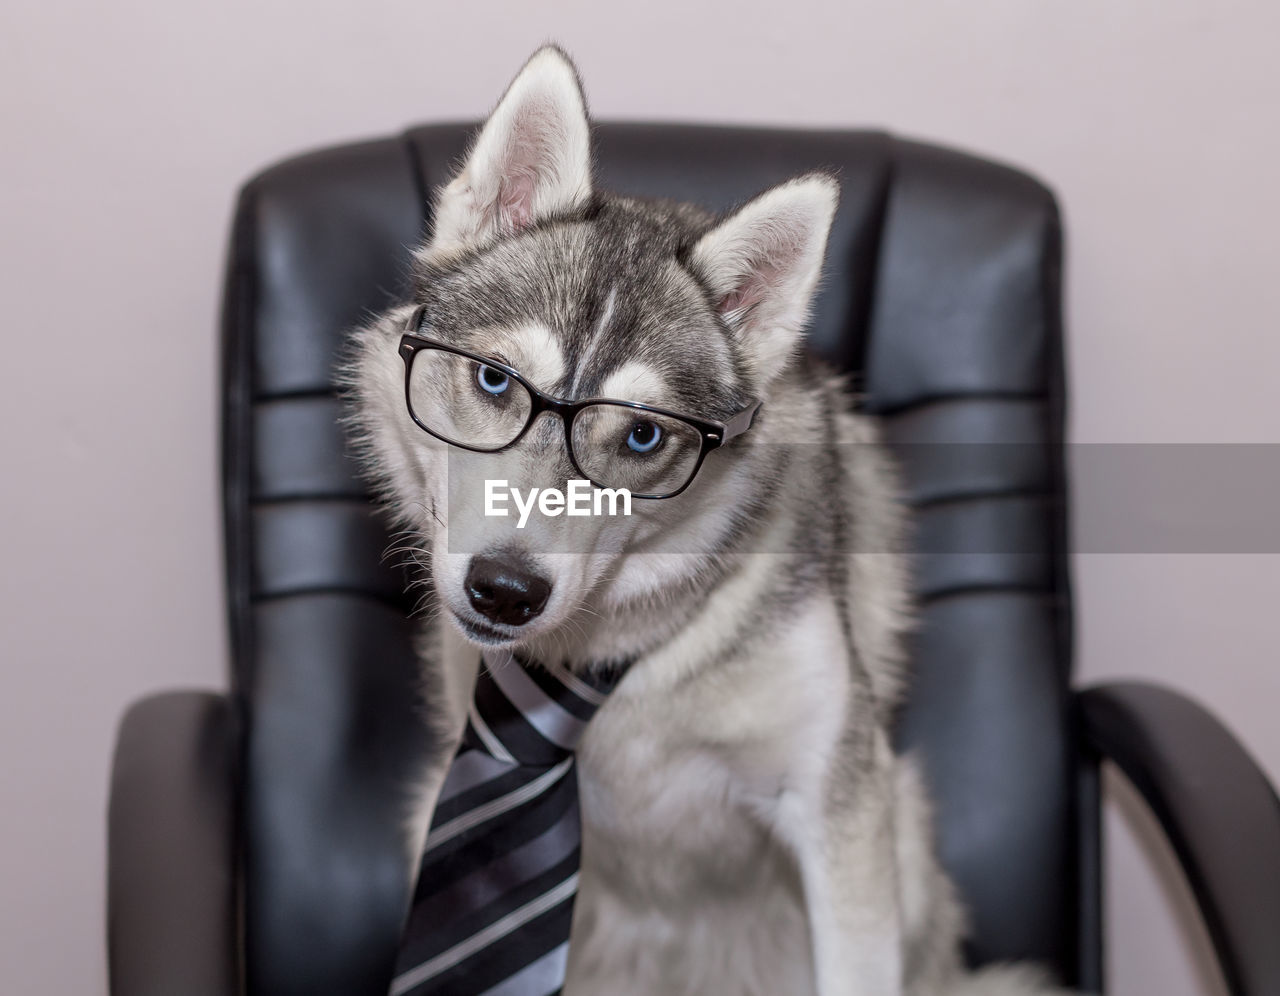 Portrait of dog wearing eyeglasses and necktie on chair